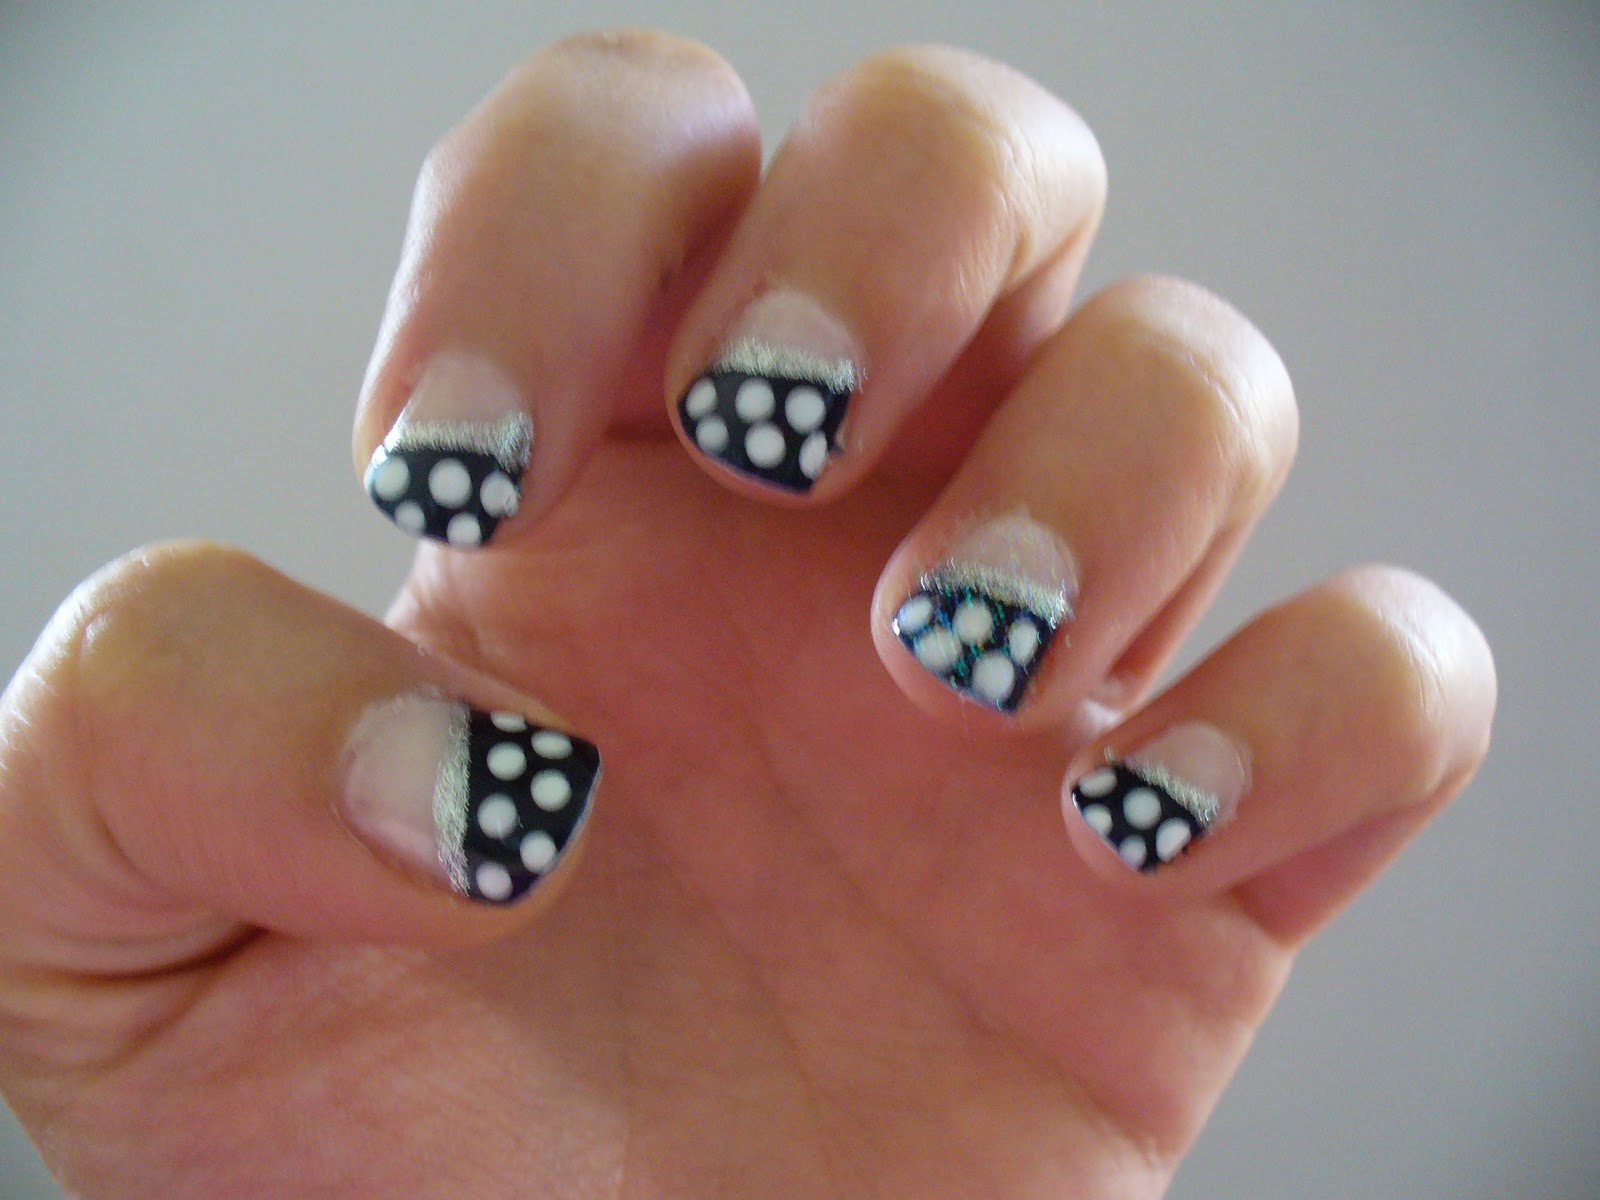 7. Cute and Simple Nail Art Designs for Teens - wide 2